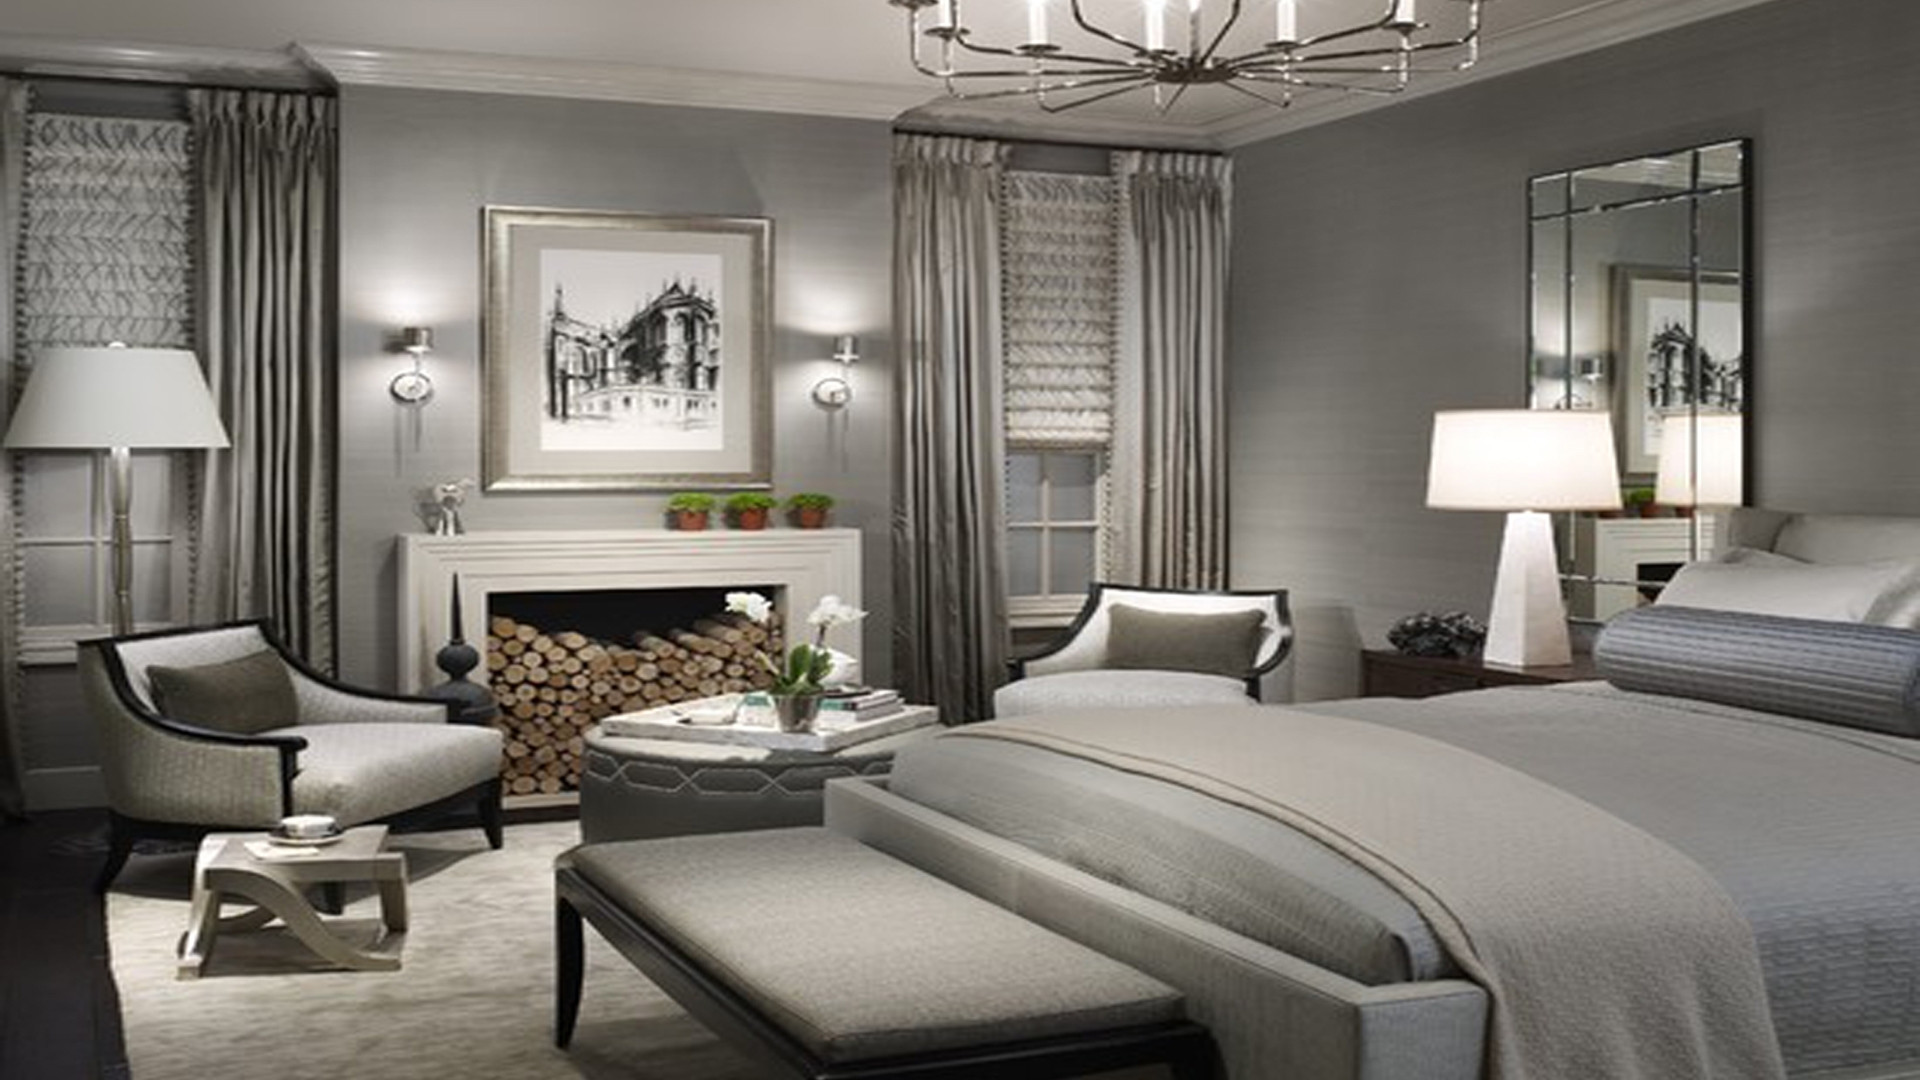 Light Grey Bedroom Walls
 15 Inspirations of Wall Accents For Grey Room